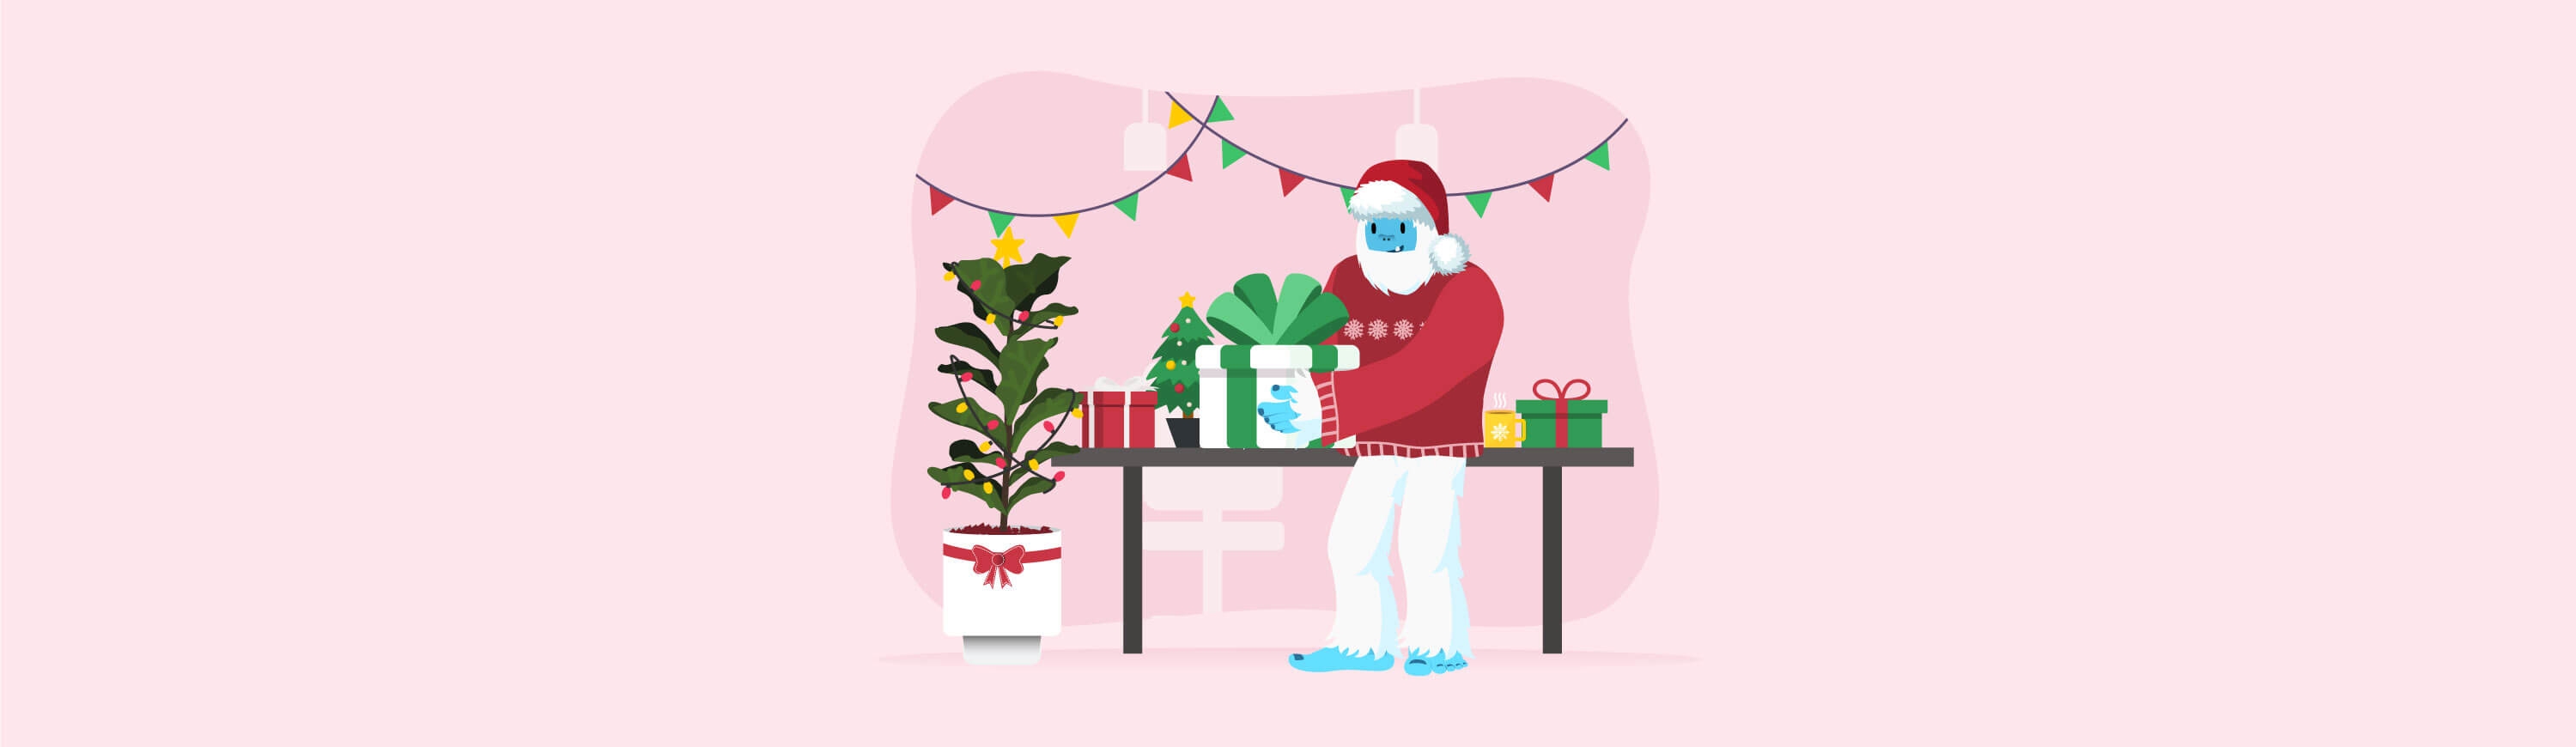 Illustration of Carl the yeti holding a present dressed as Santa Claus.